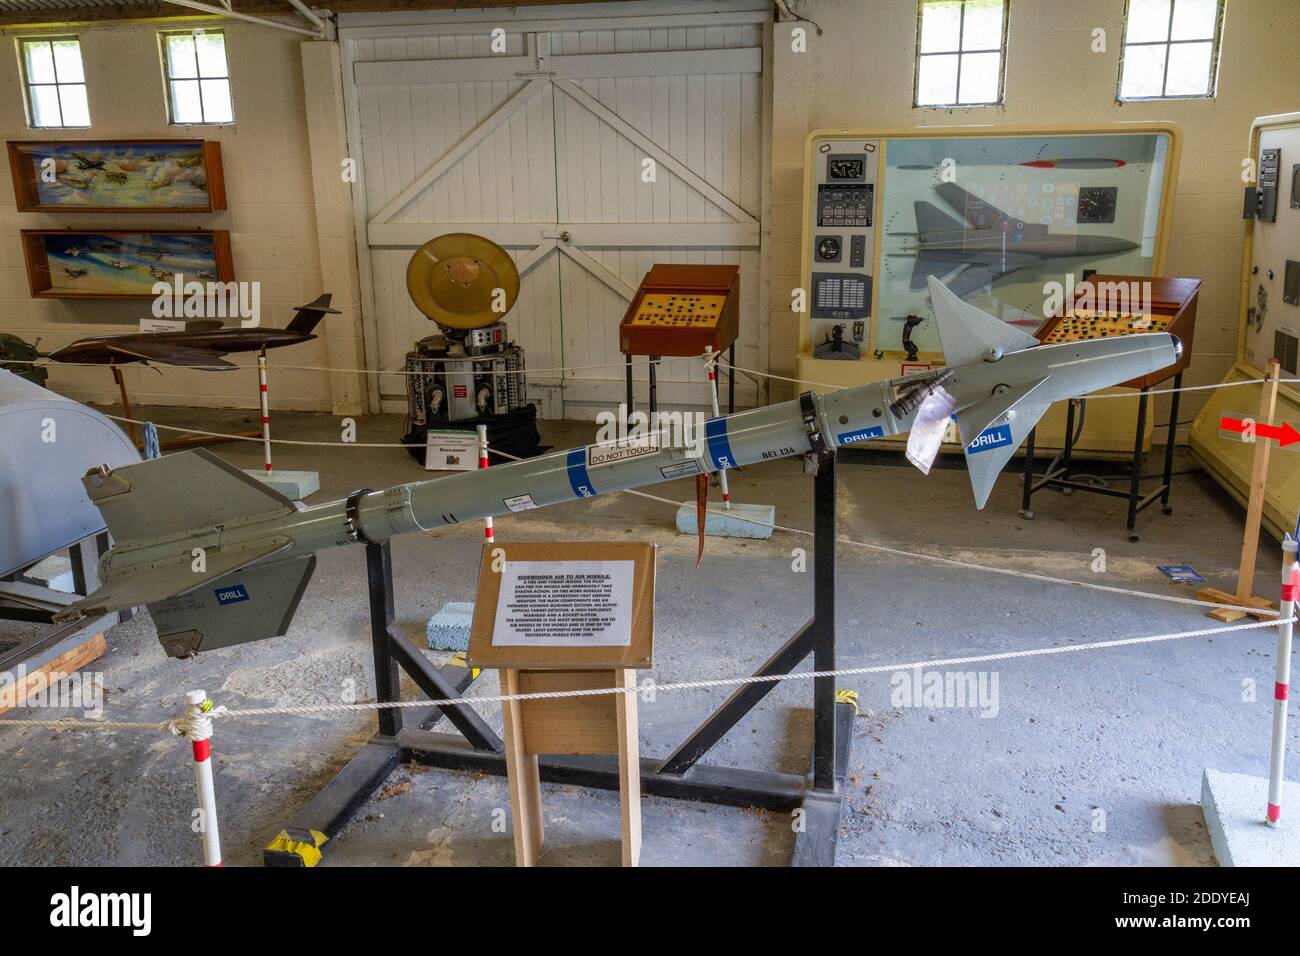 A Sidewinder air-to-air missile, Thorpe Camp Visitor Centre, a WWII Royal Air Force barracks, Lincolnshire, UK. Stock Photo